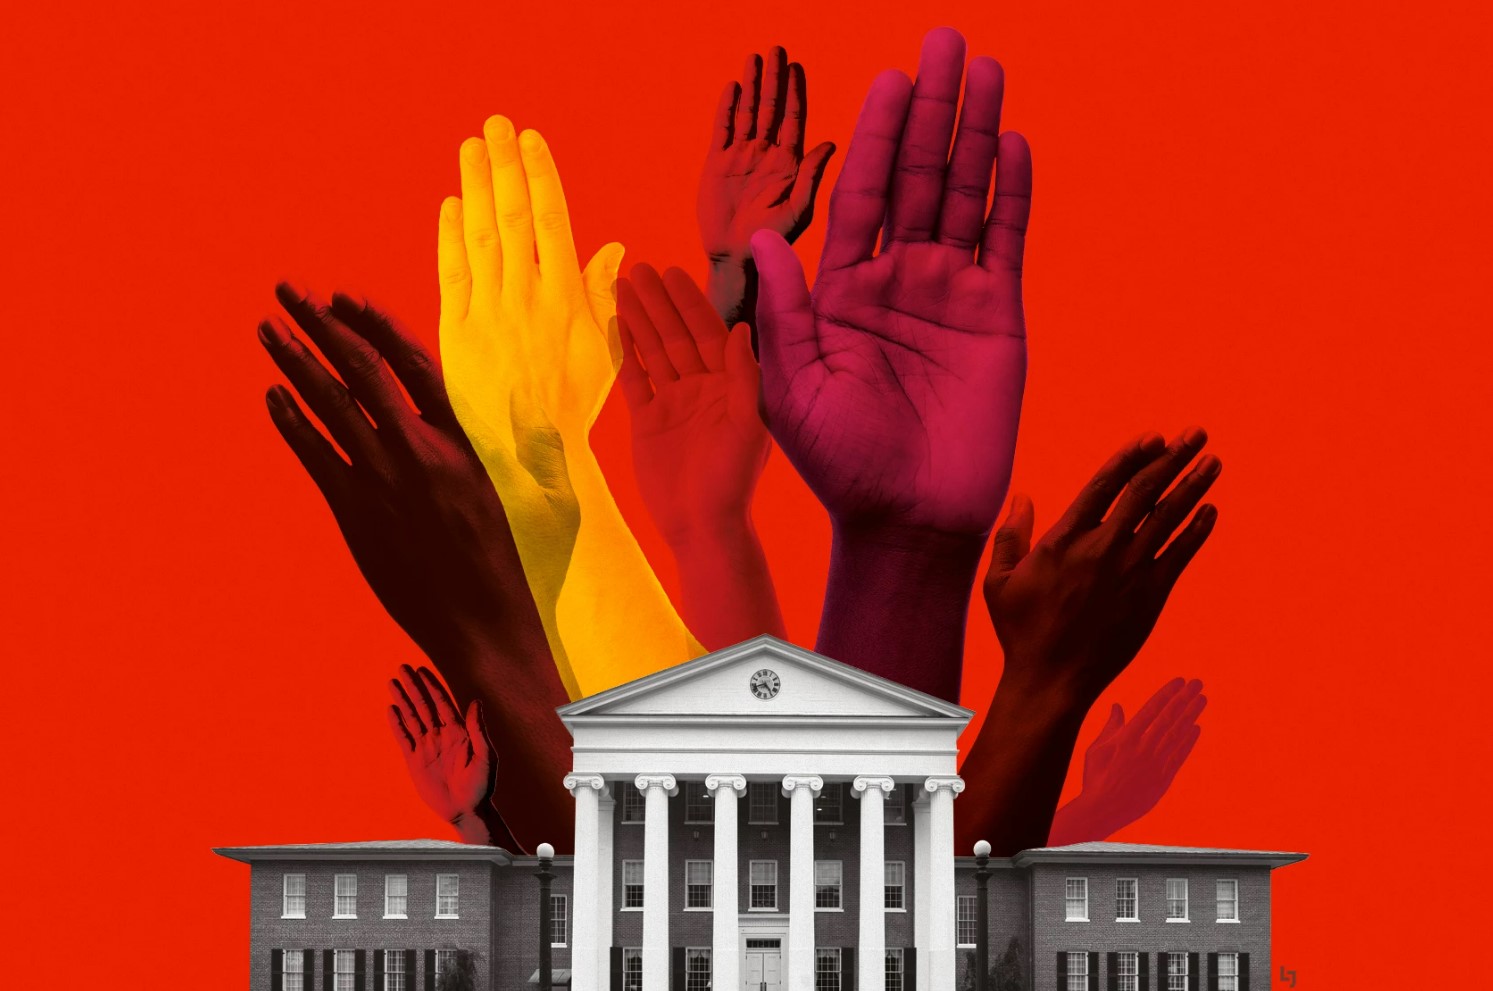 Hands coming out of an educational institution, showing diversity